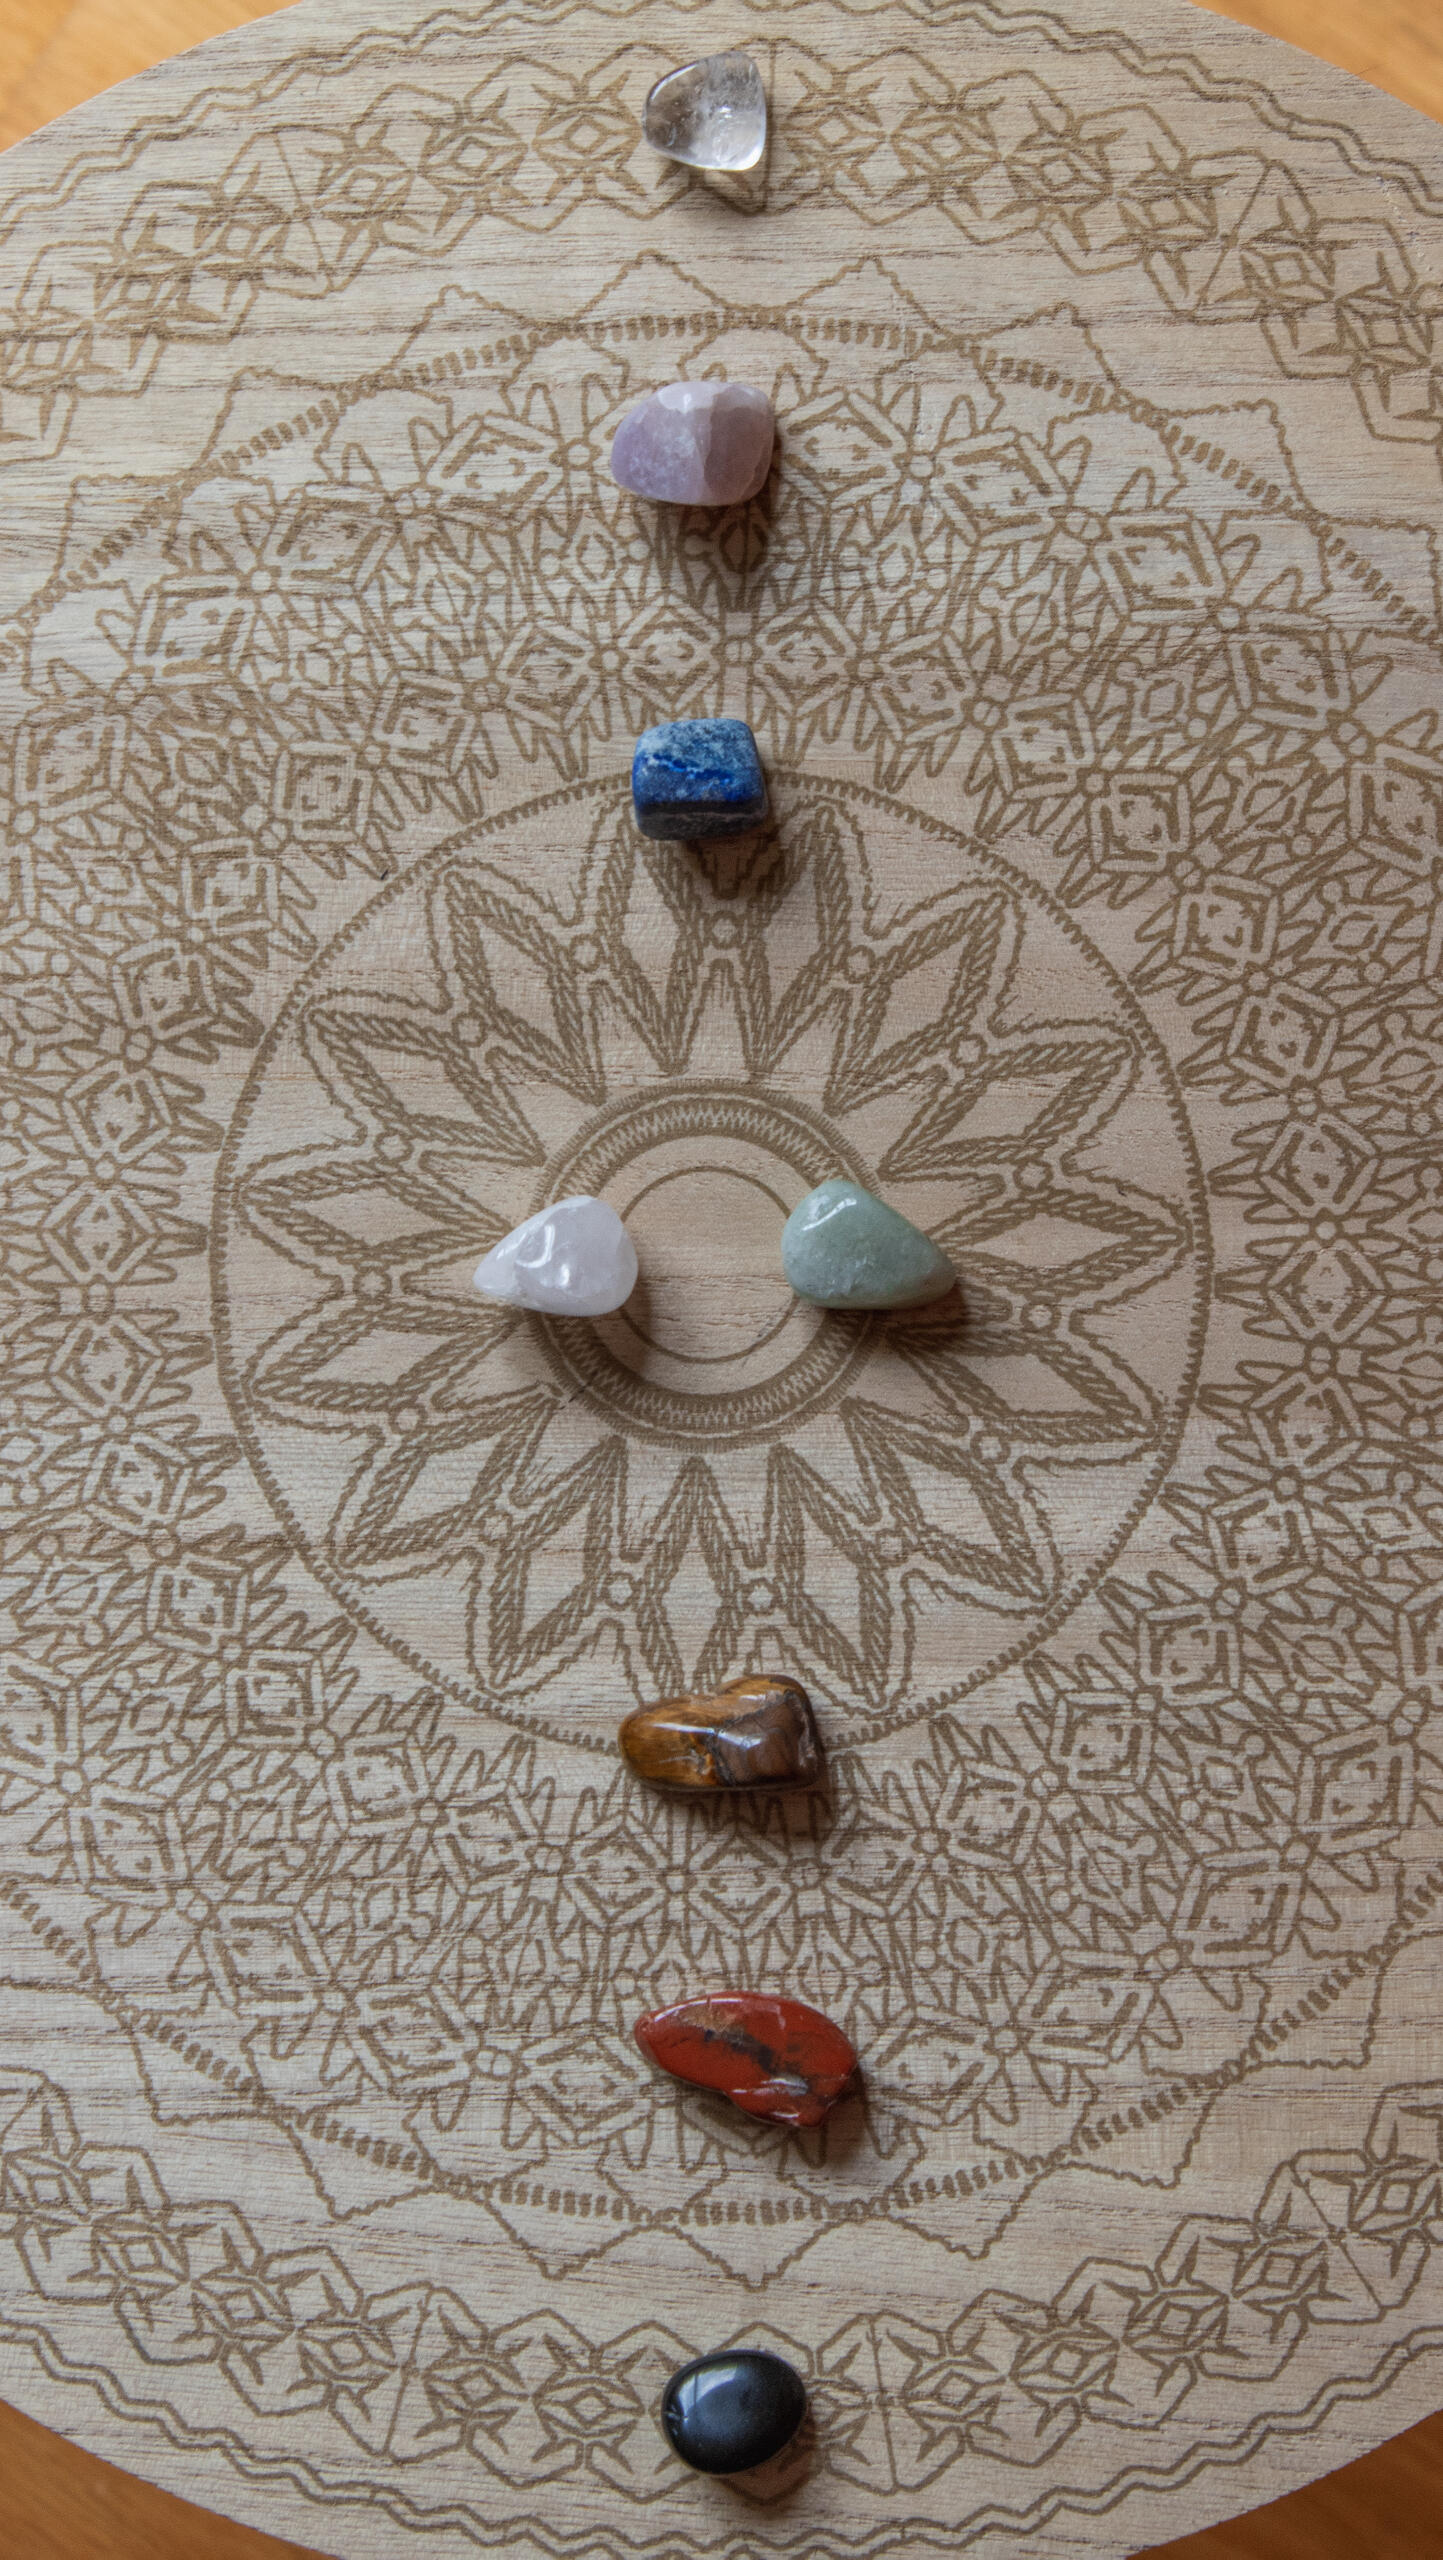 Image of some crystal tumblestones on a brown fabric background